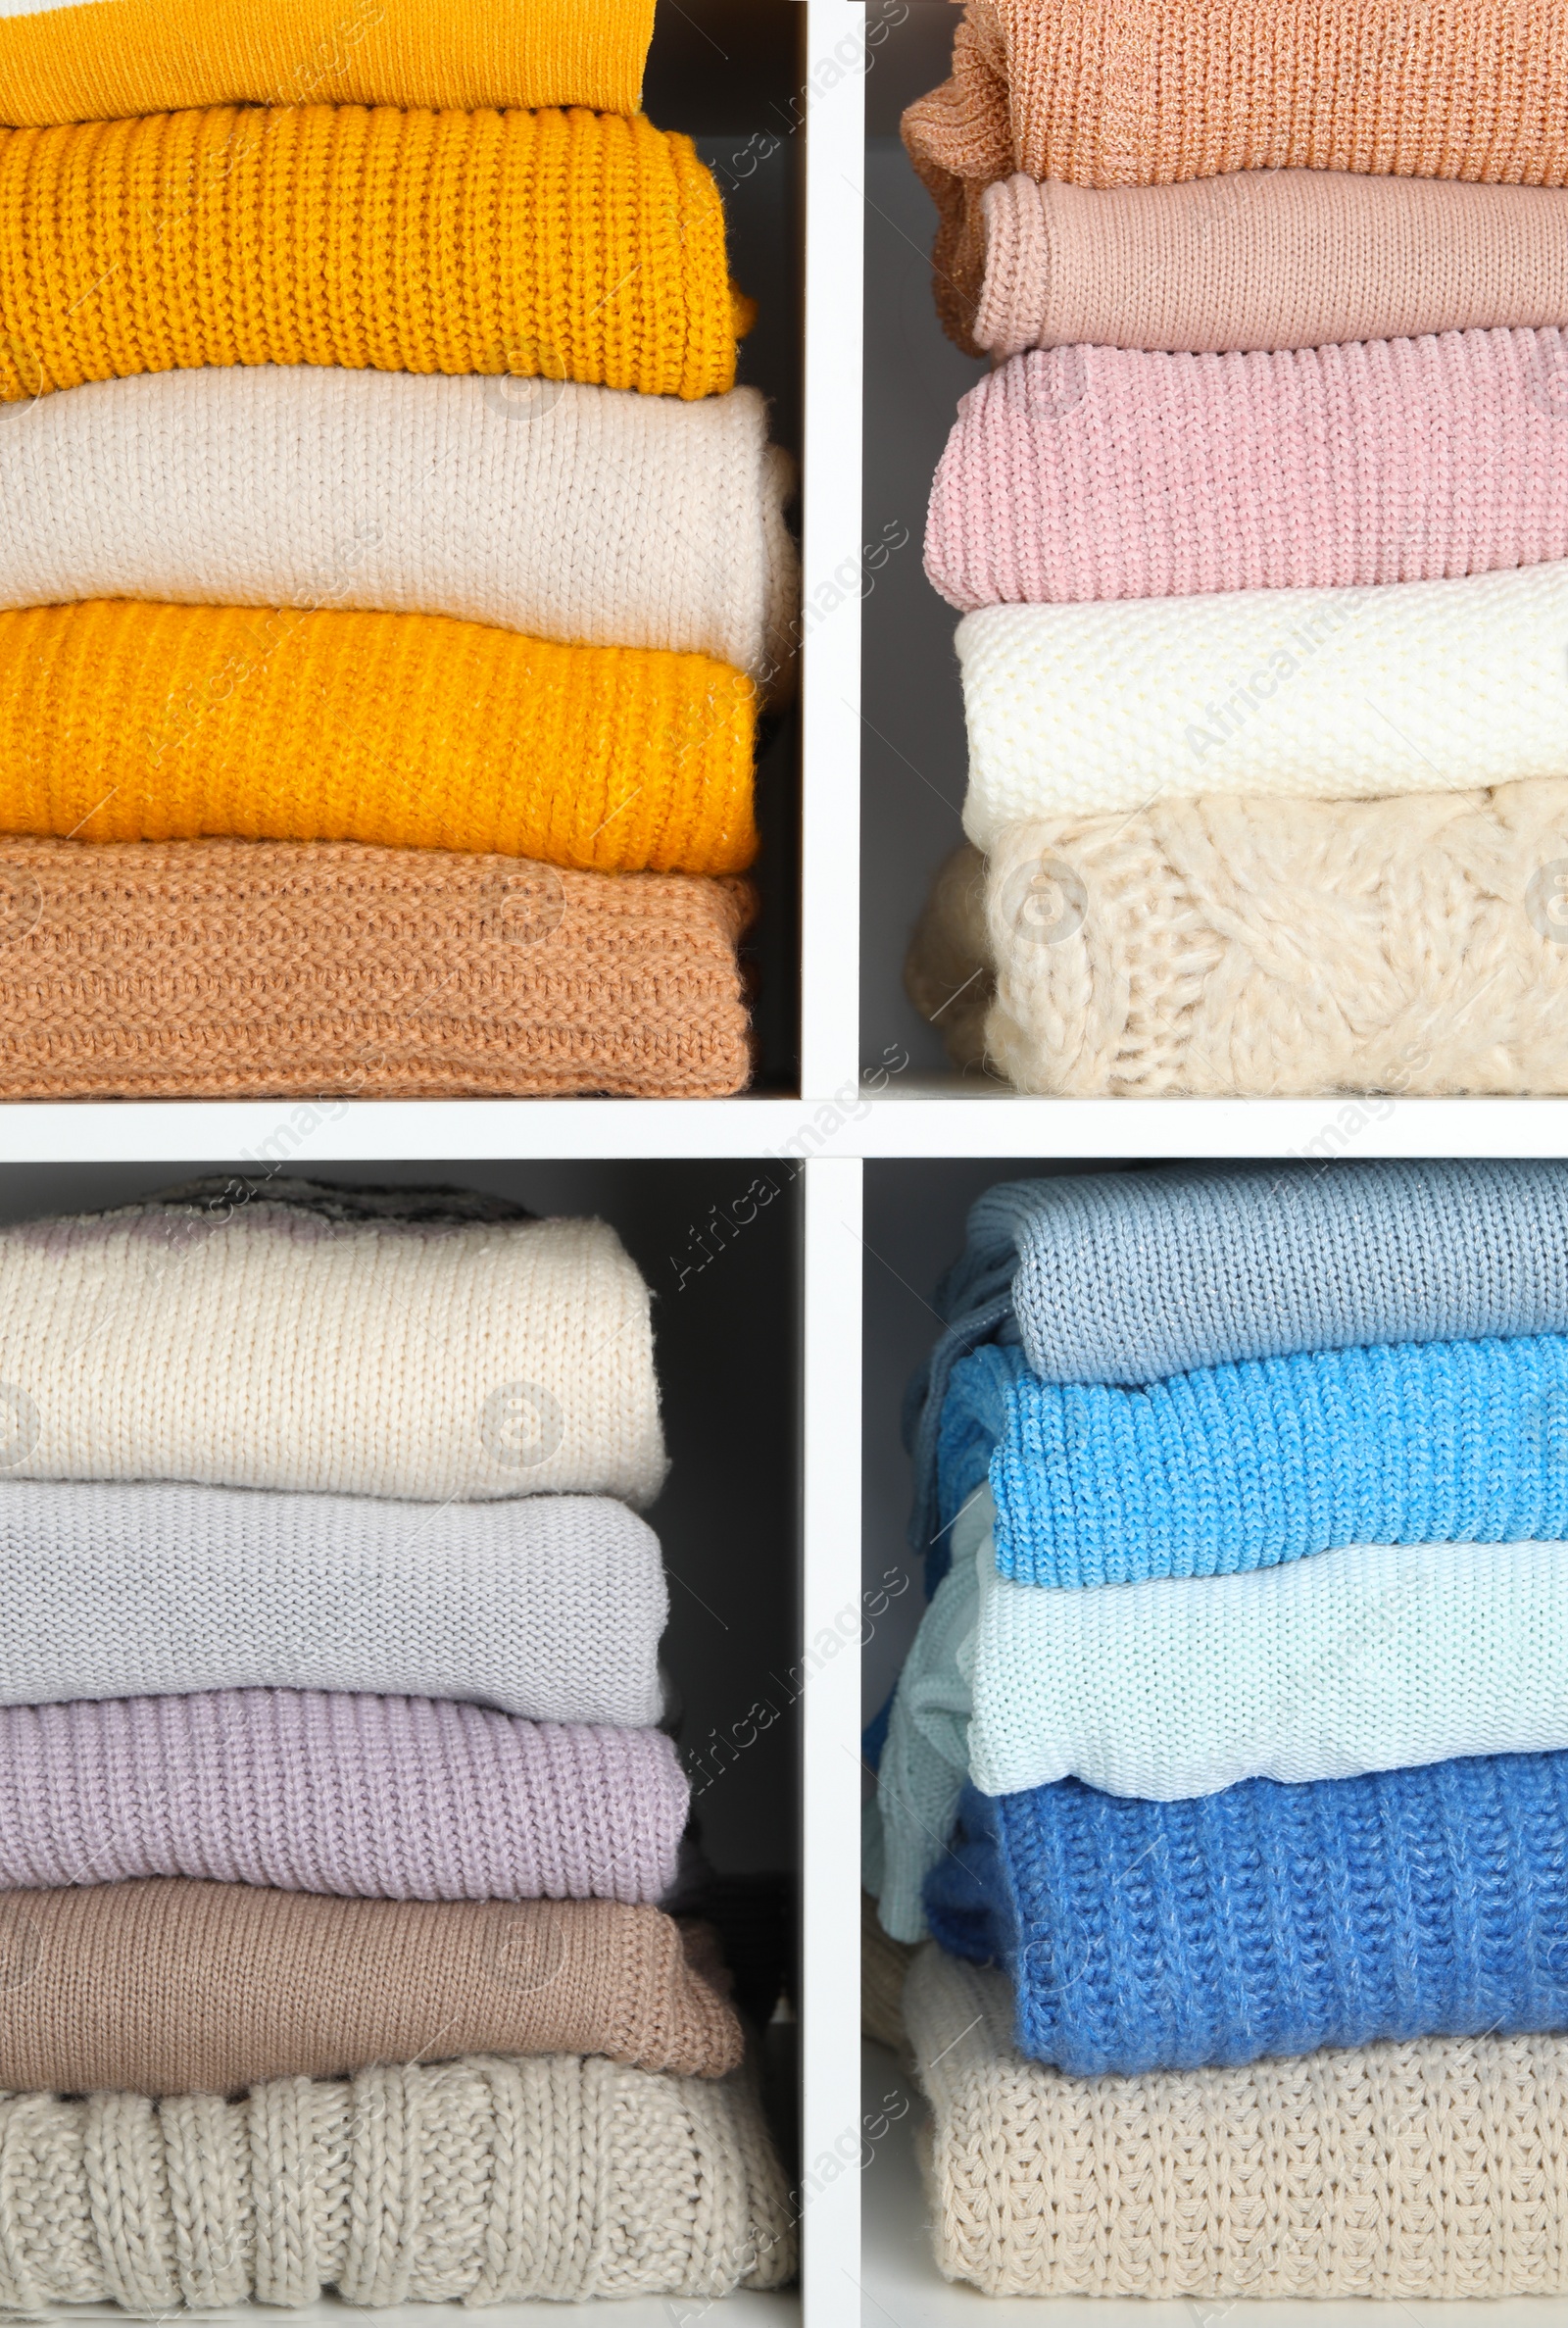 Photo of Many knitted winter clothes stacked on shelves